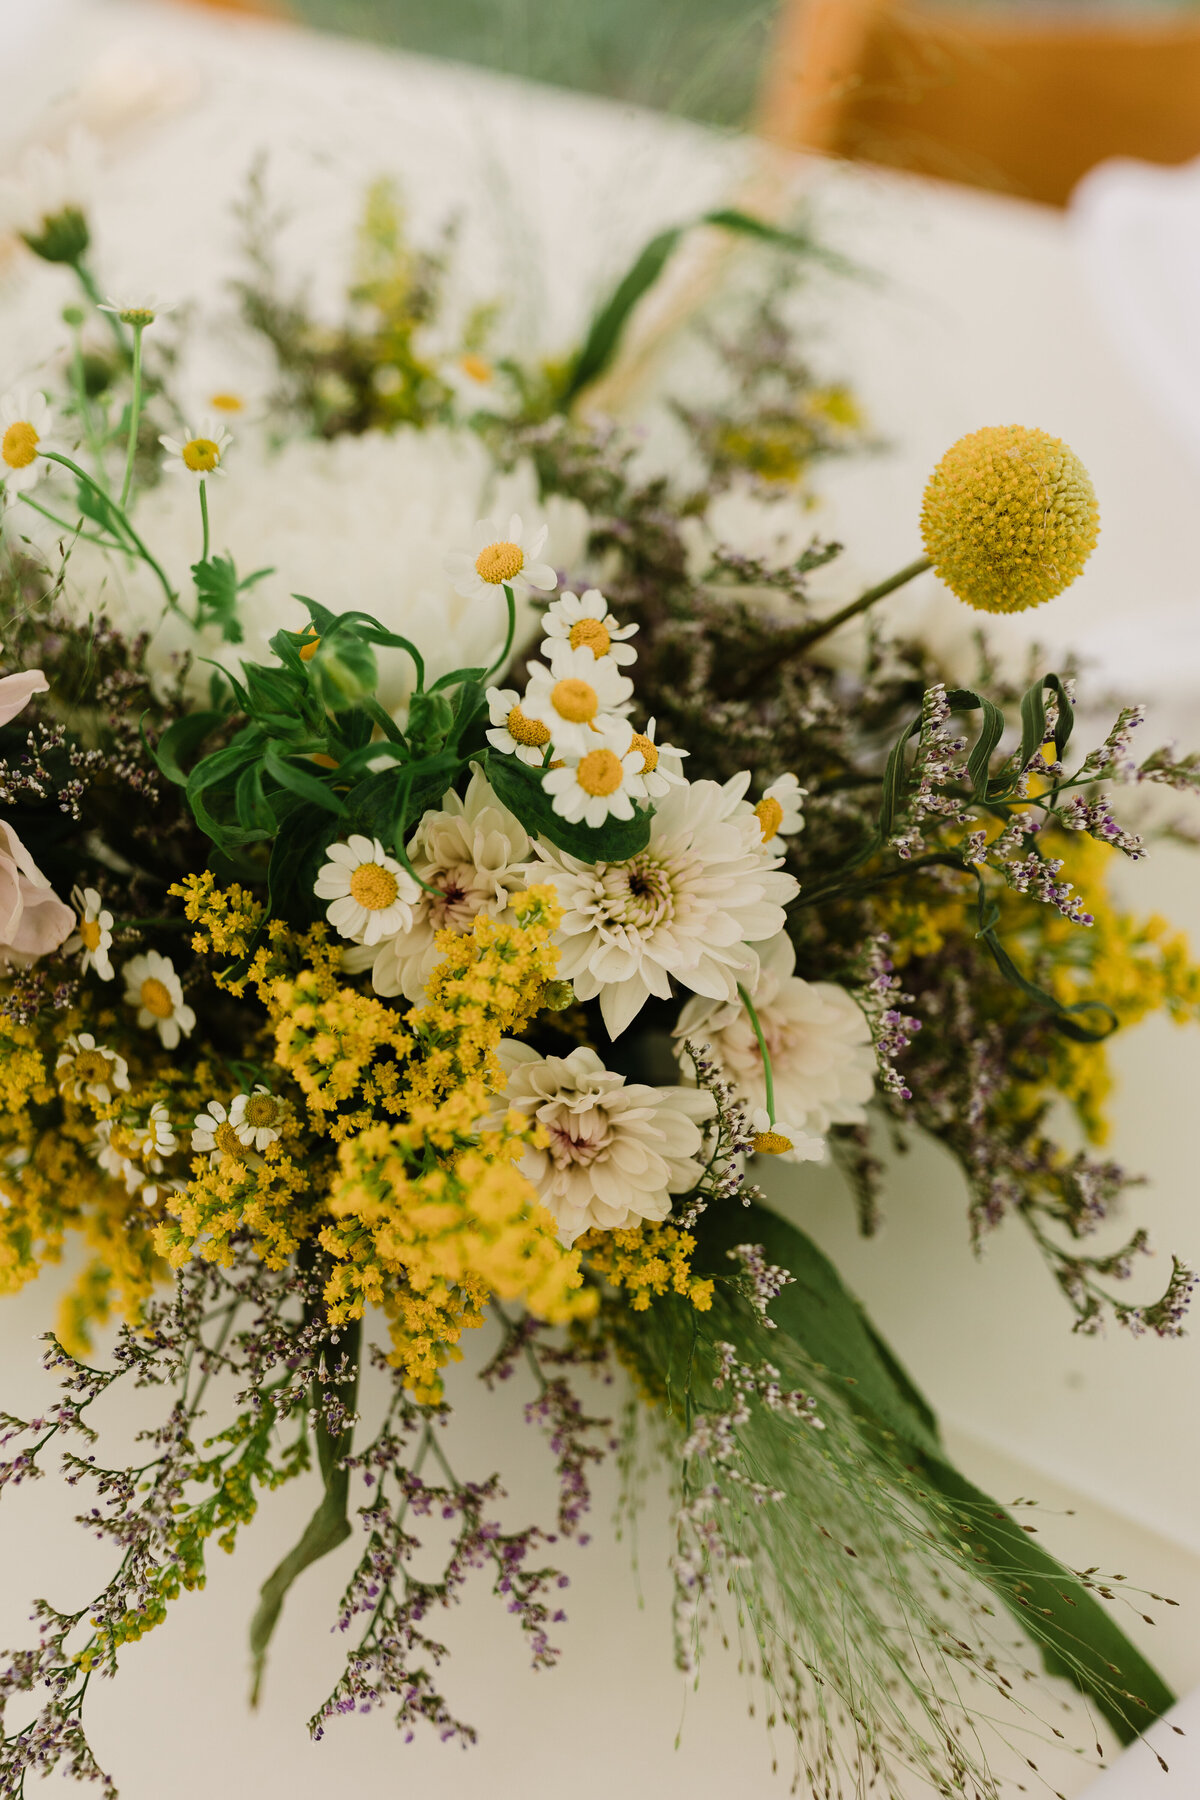 Bridal bouquet of white and yellow wild flowers